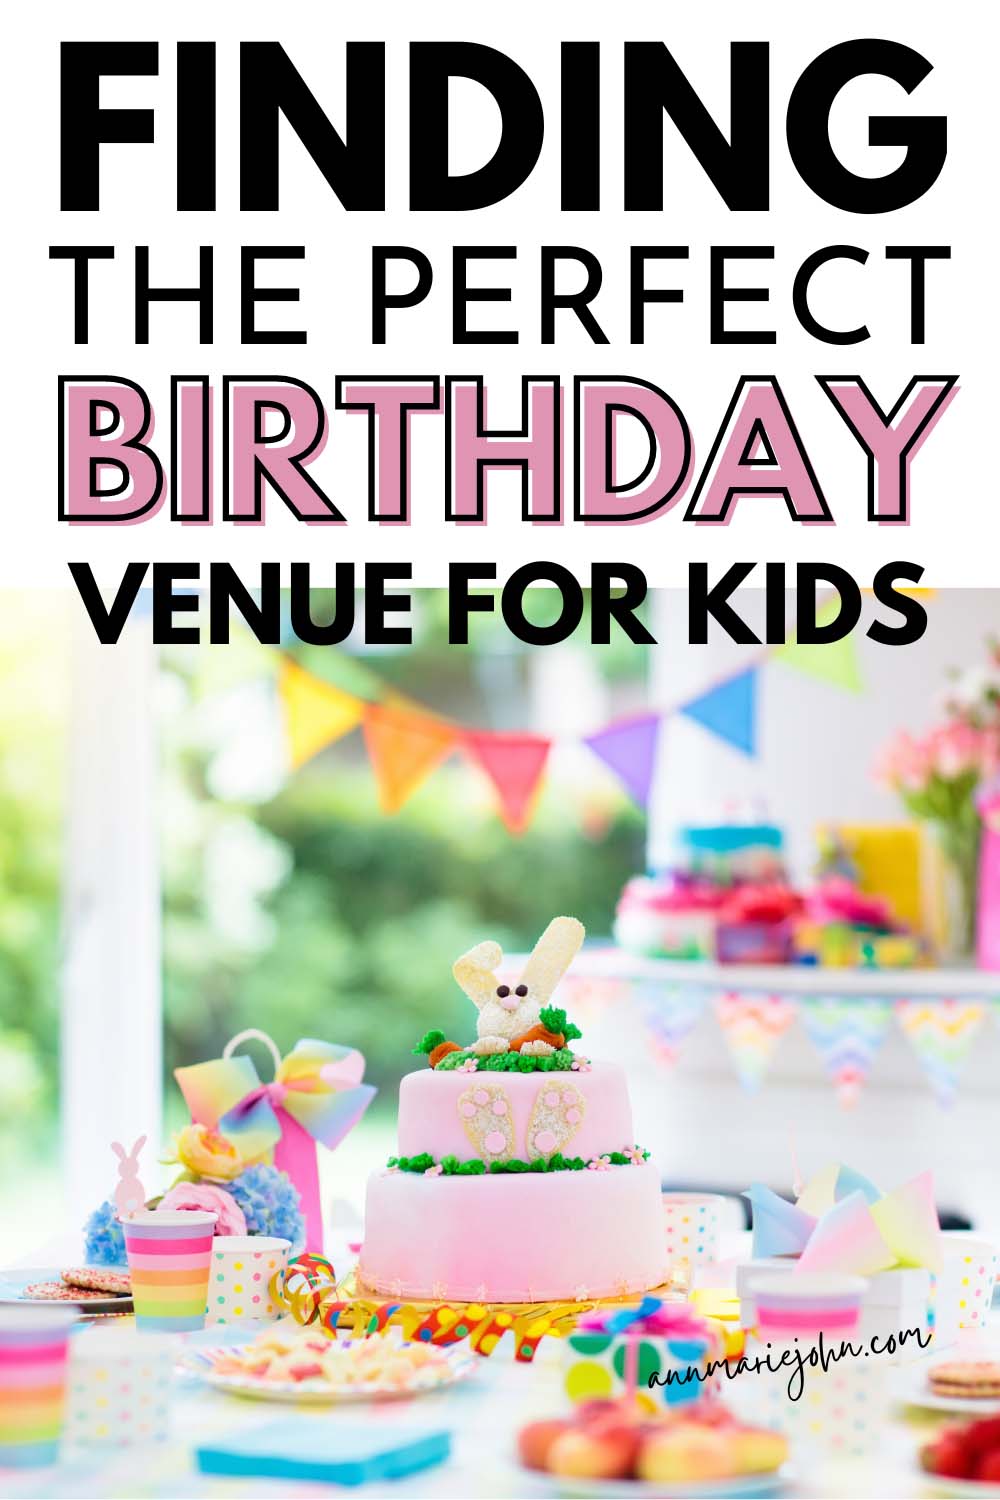 Finding the Perfect Birthday Venue for Kids